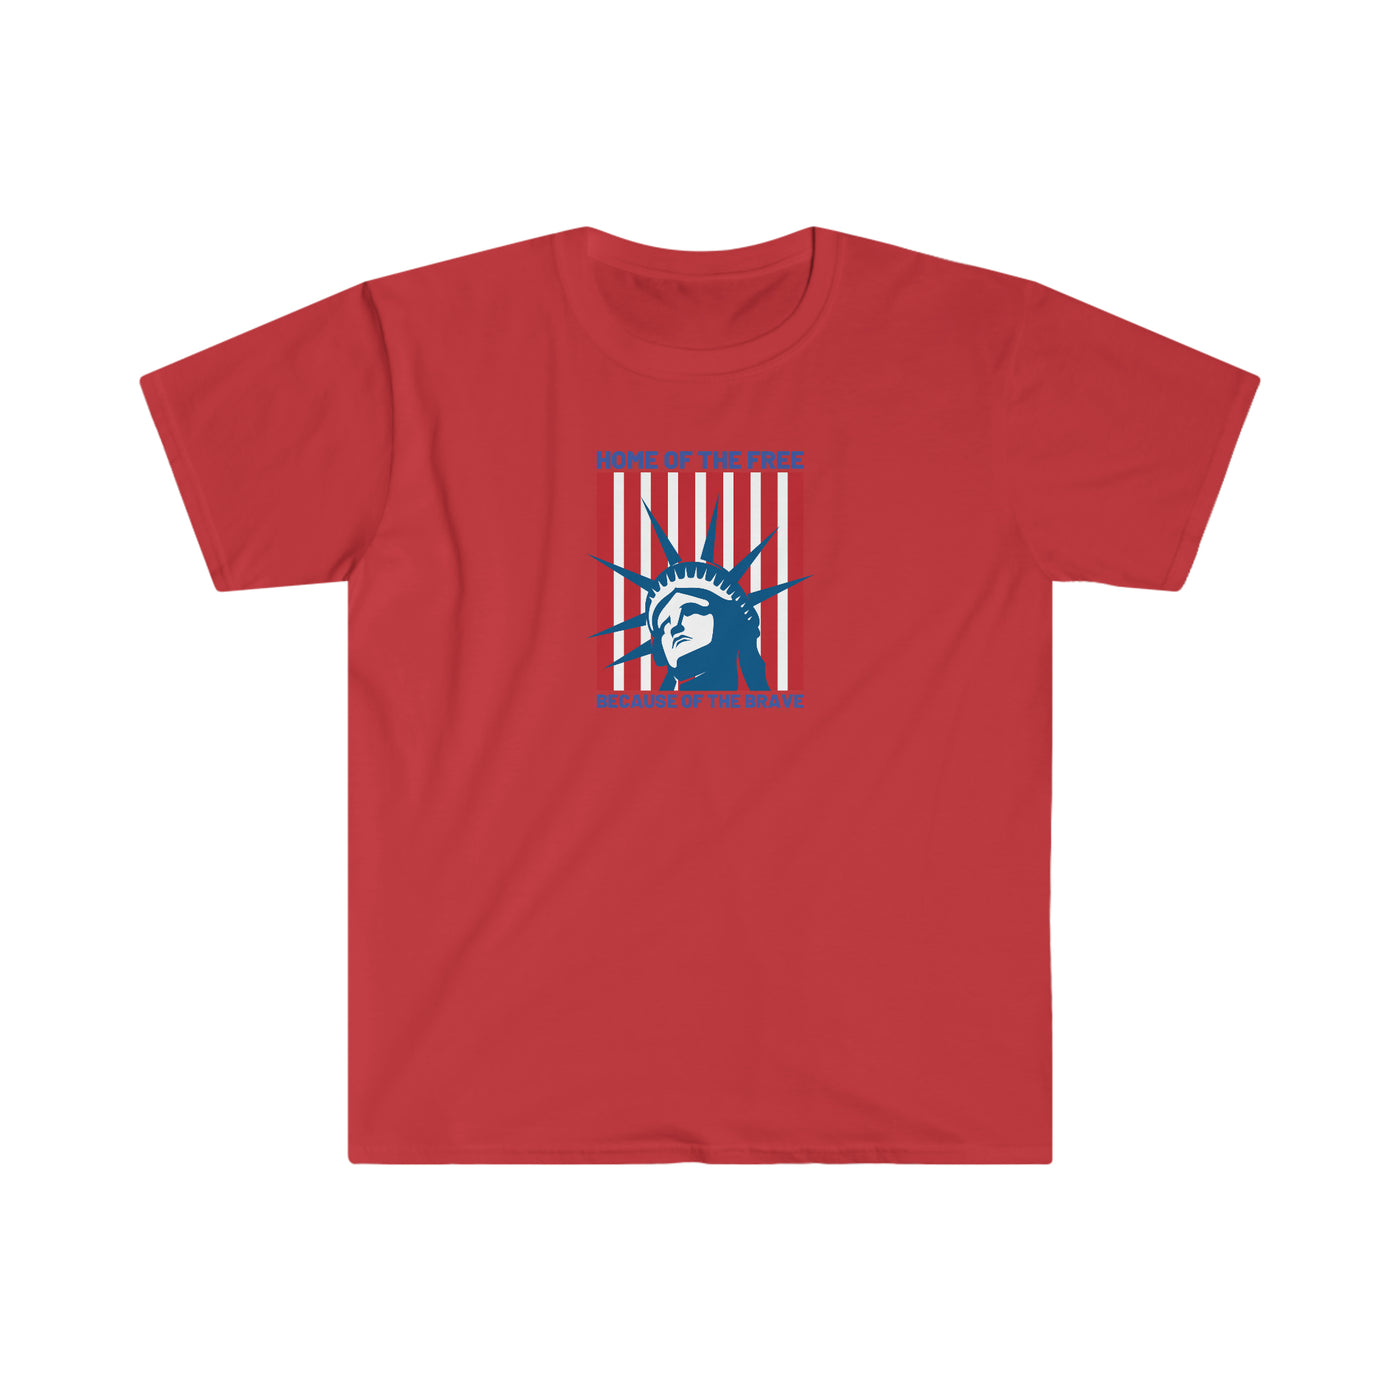 Home Of The Free Because Of The Brave Unisex T-Shirt